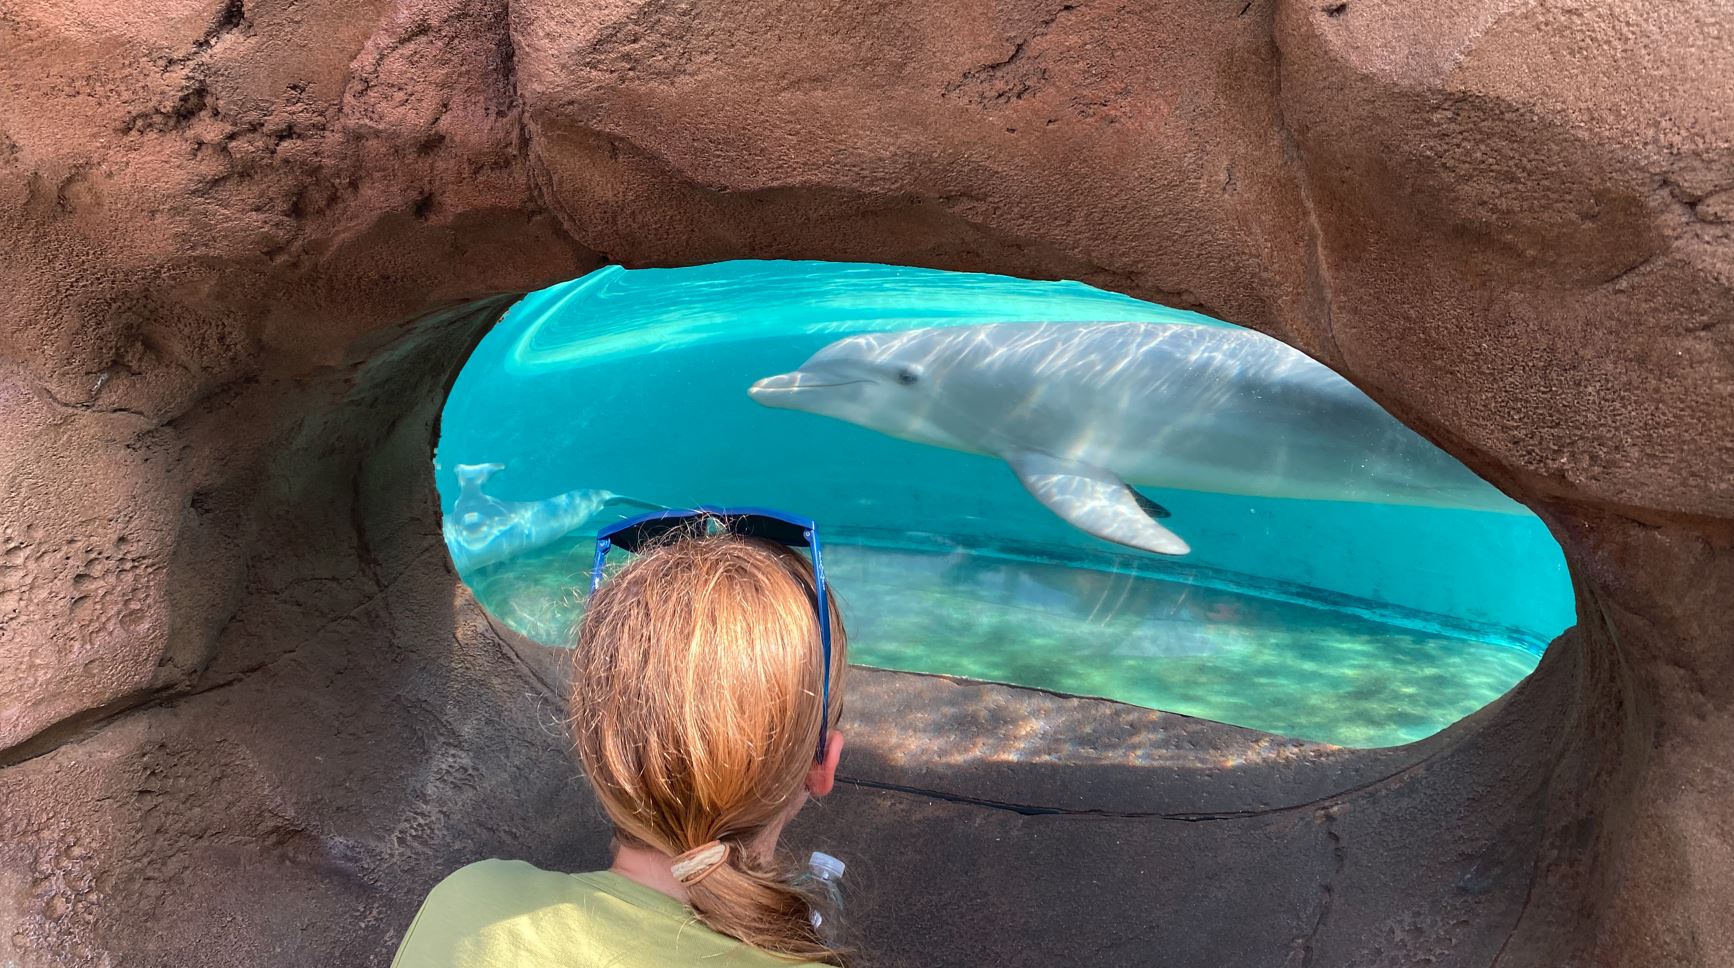 Evelyn watches dolphin's at Seaworld.